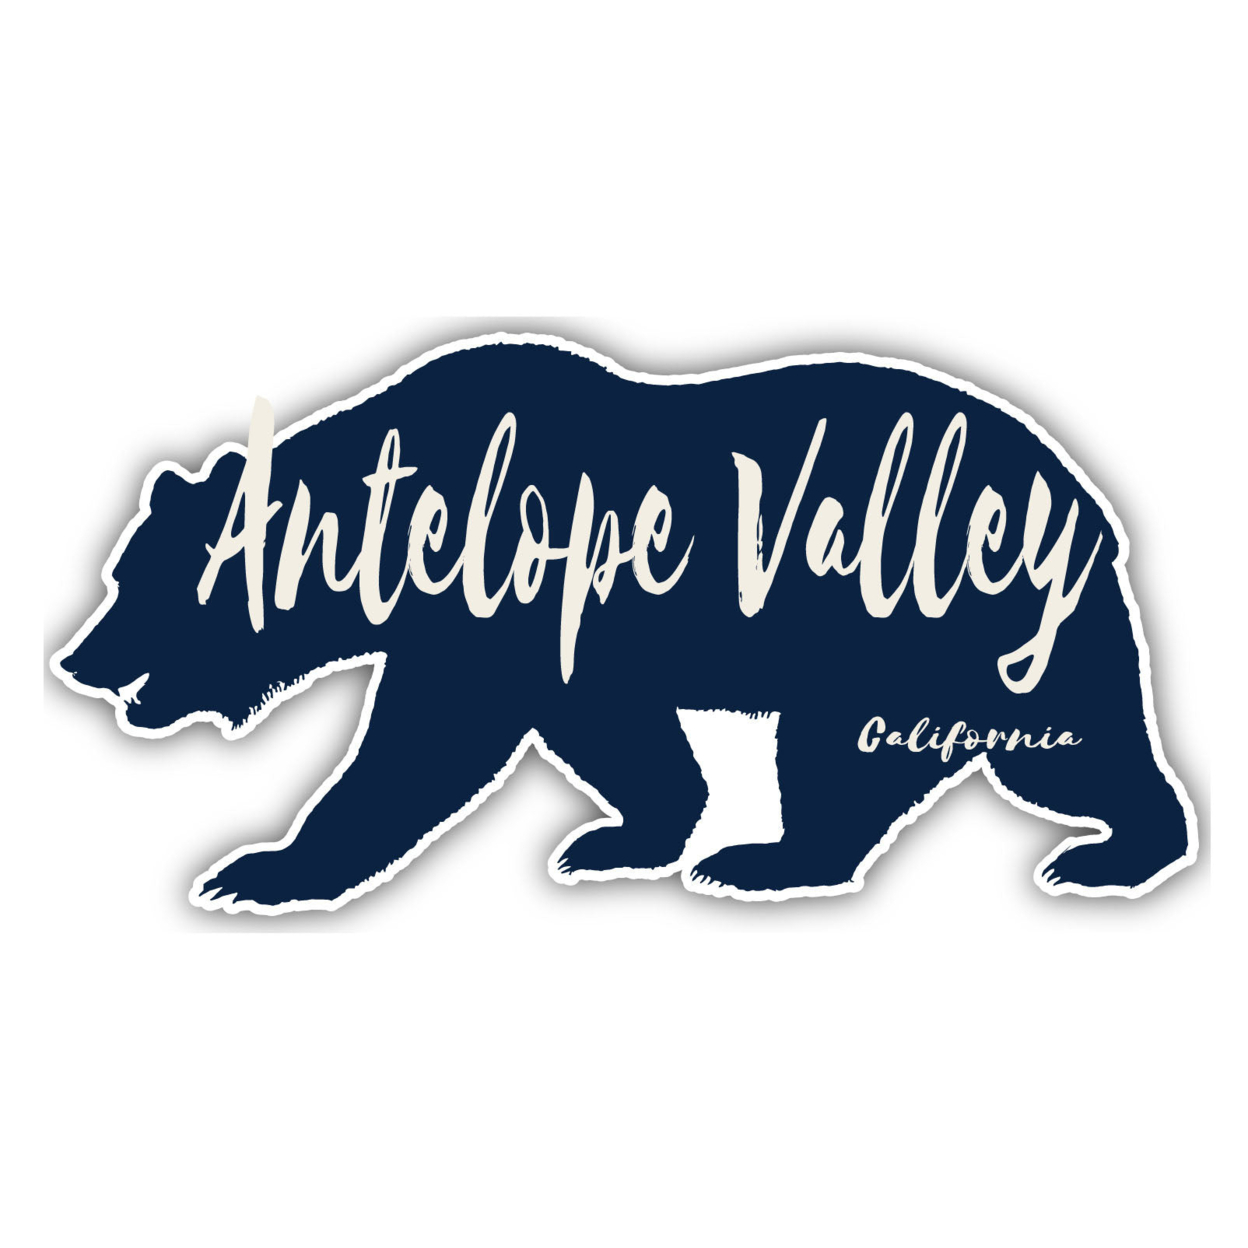 Antelope Valley California Souvenir Decorative Stickers (Choose Theme And Size) - Single Unit, 10-Inch, Bear